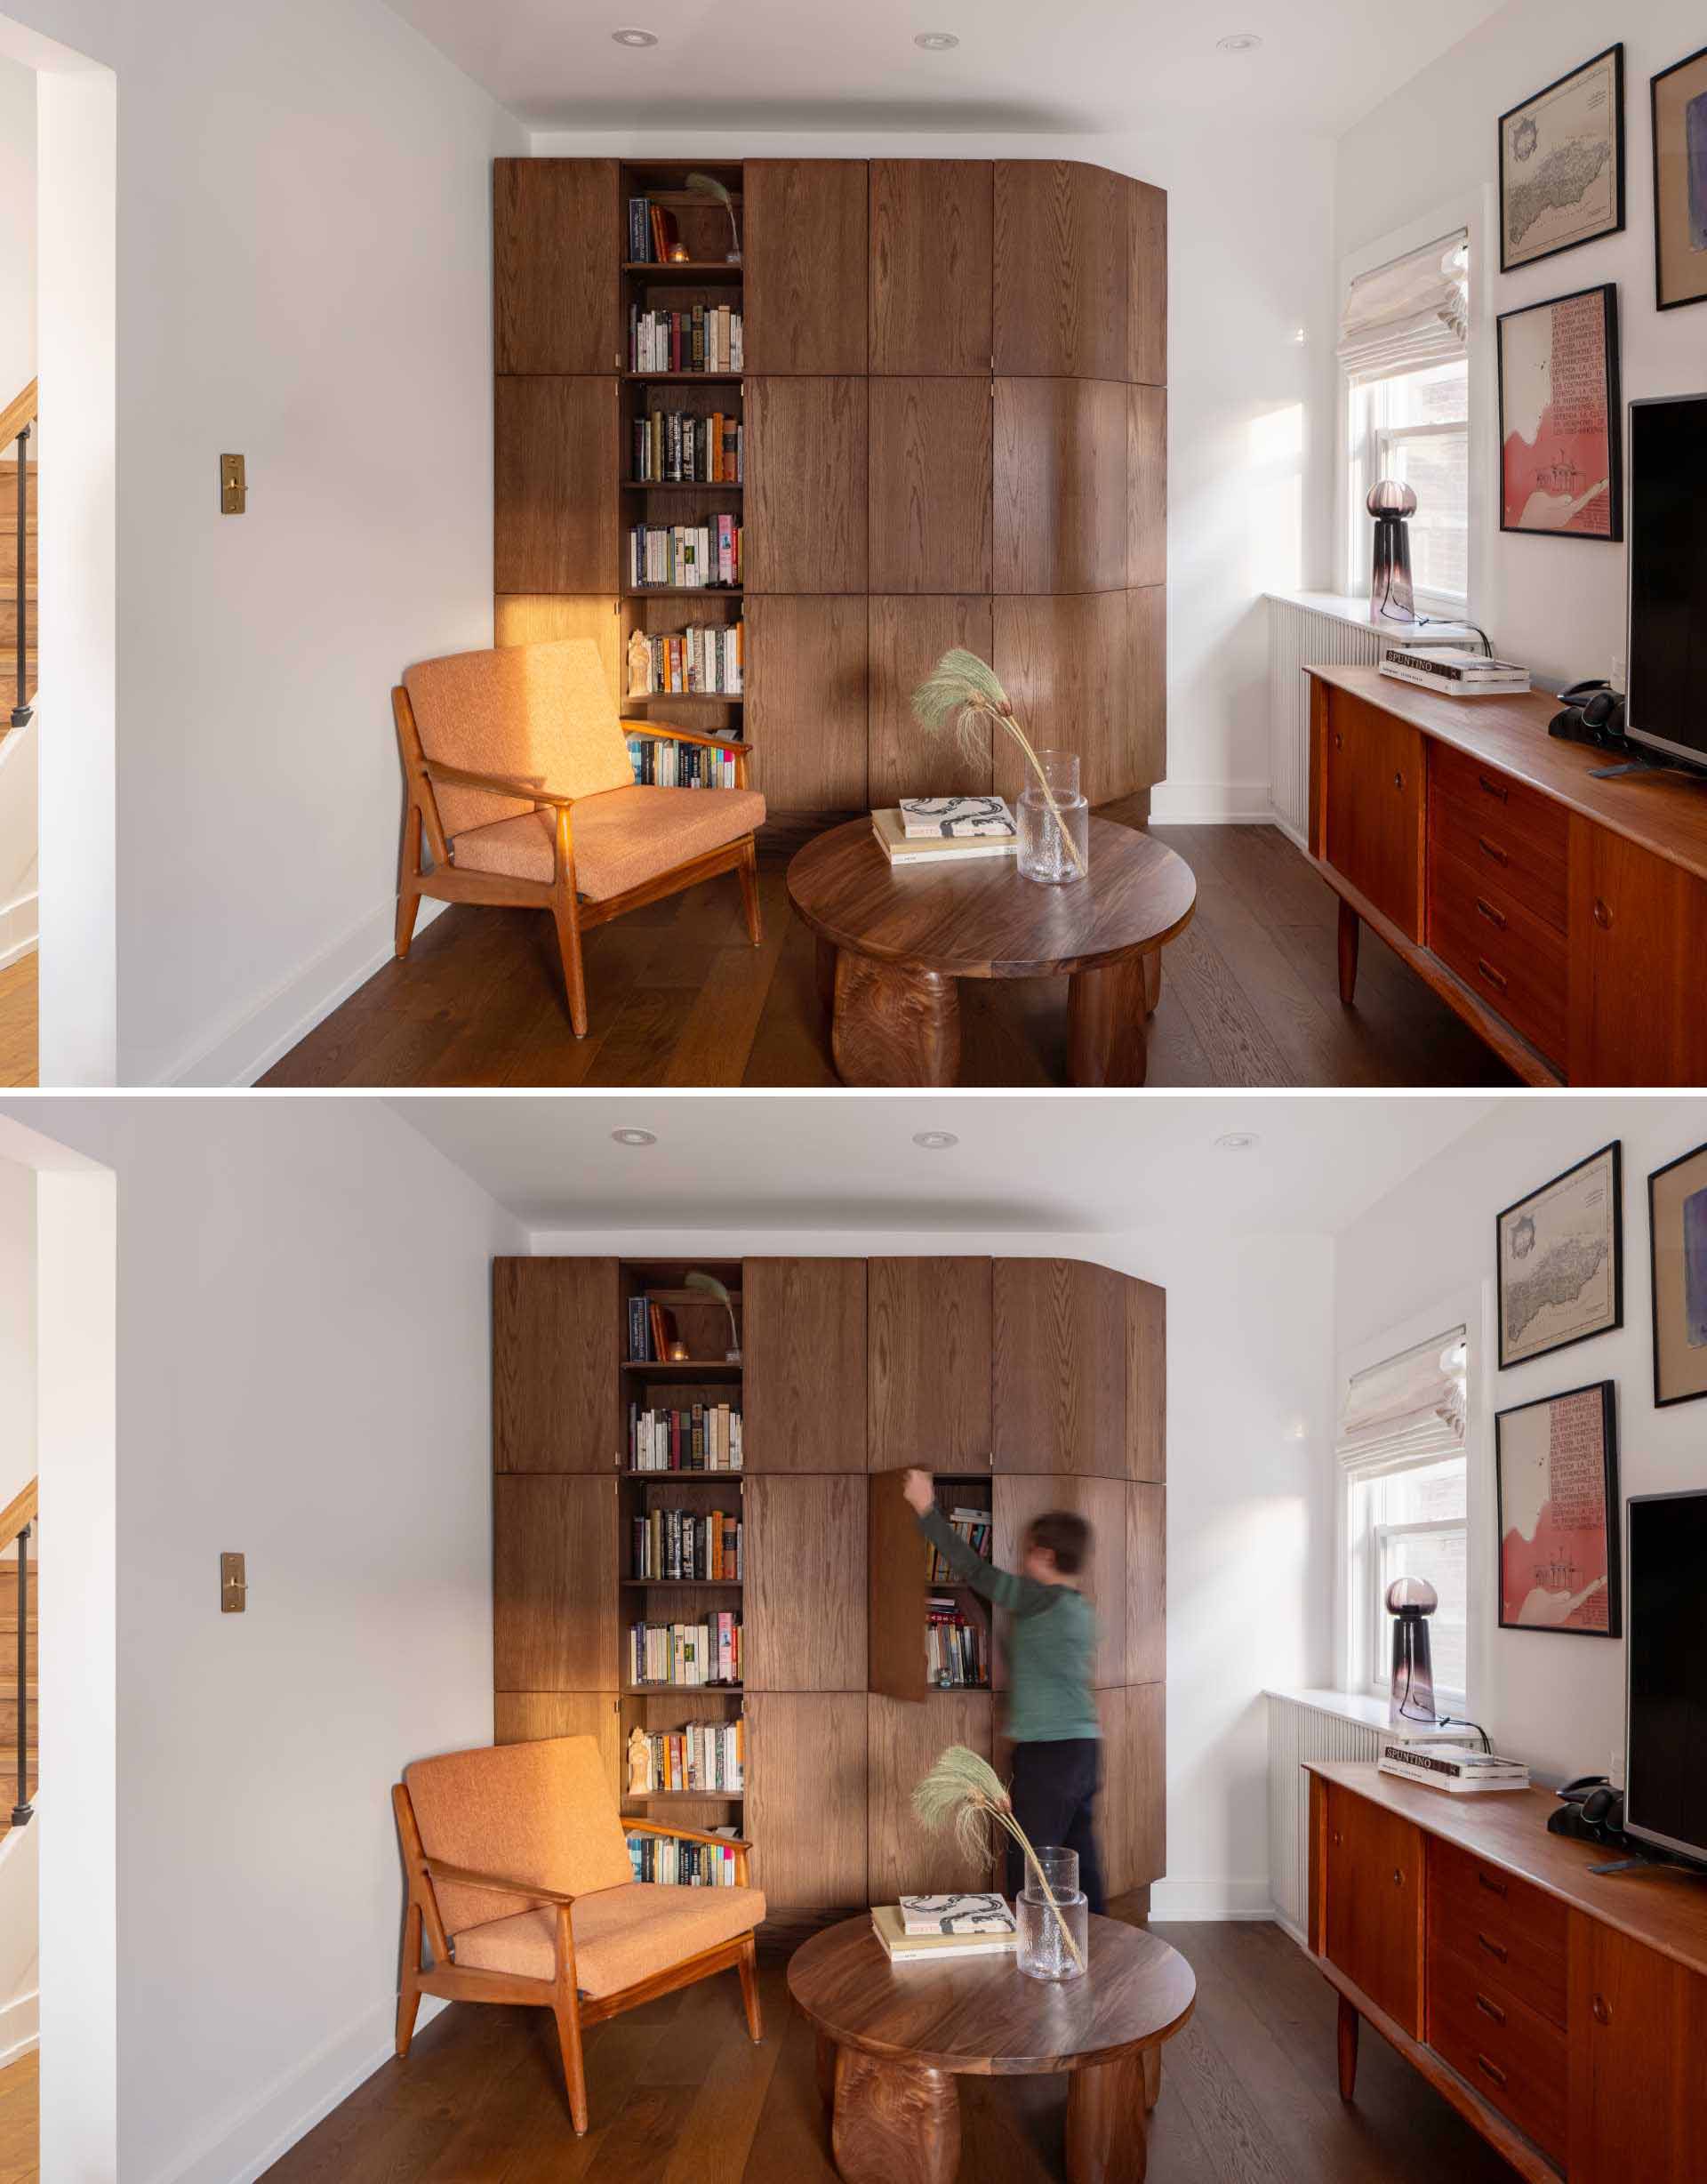 A curved wood cabinet and bookshelf allows the light from the window to shine through to the interior.